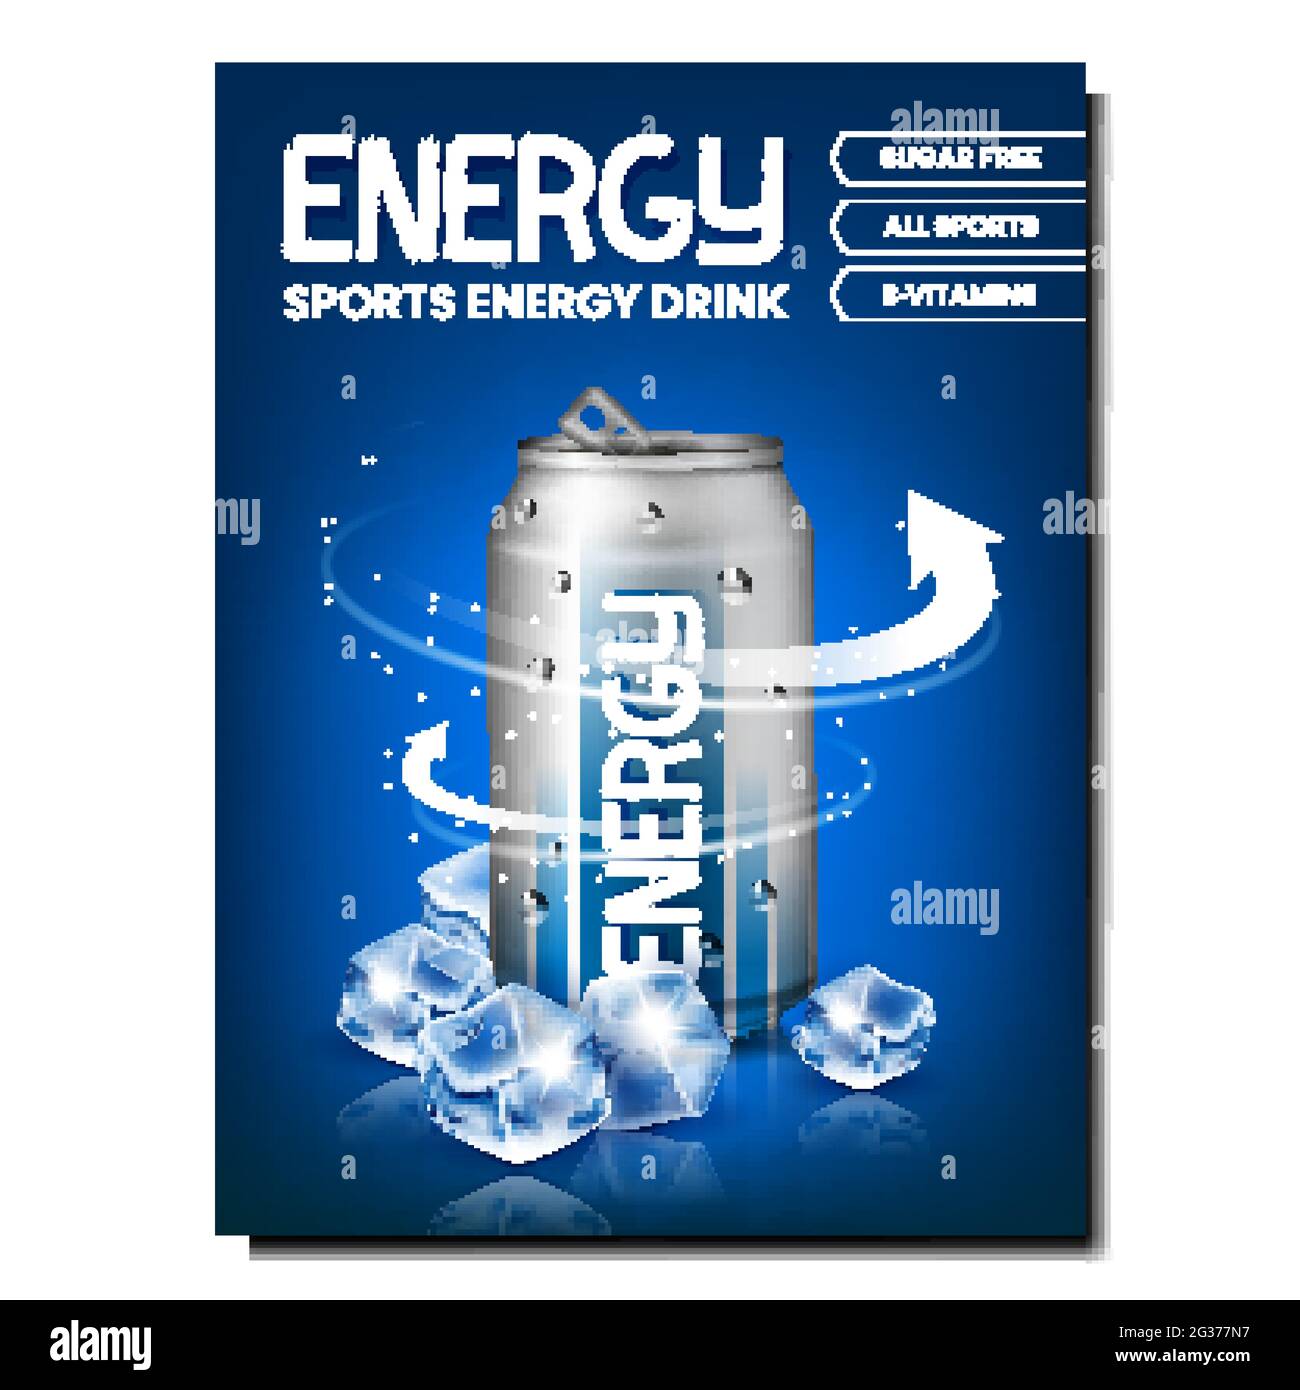 Sports Energy Drink Promotional Poster Vector Stock Vector Image & Art -  Alamy